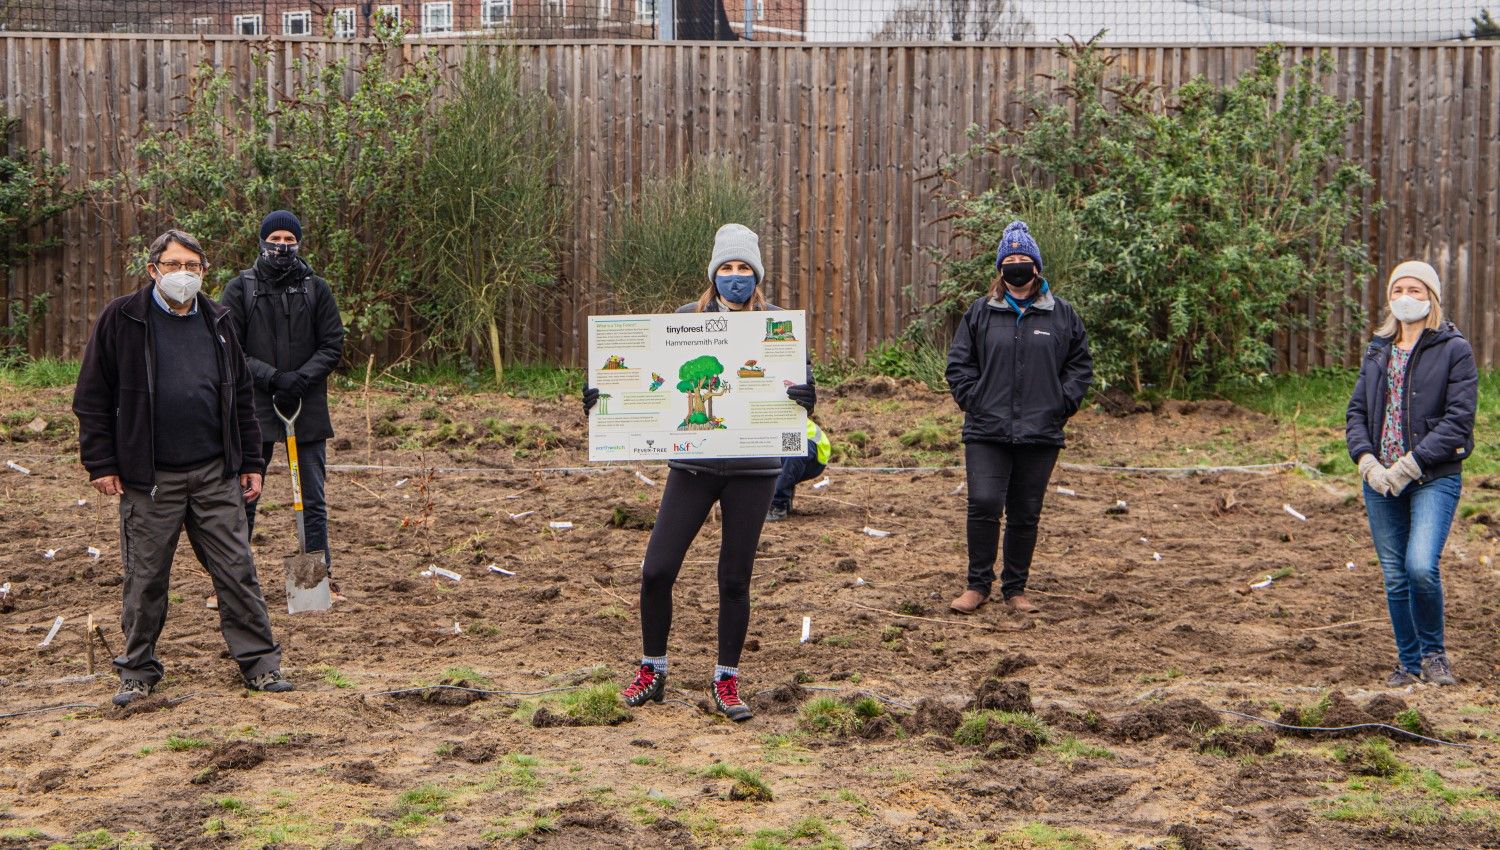 March 2021: Fever-Tree staff planting (Photo credit Fever-Tree)